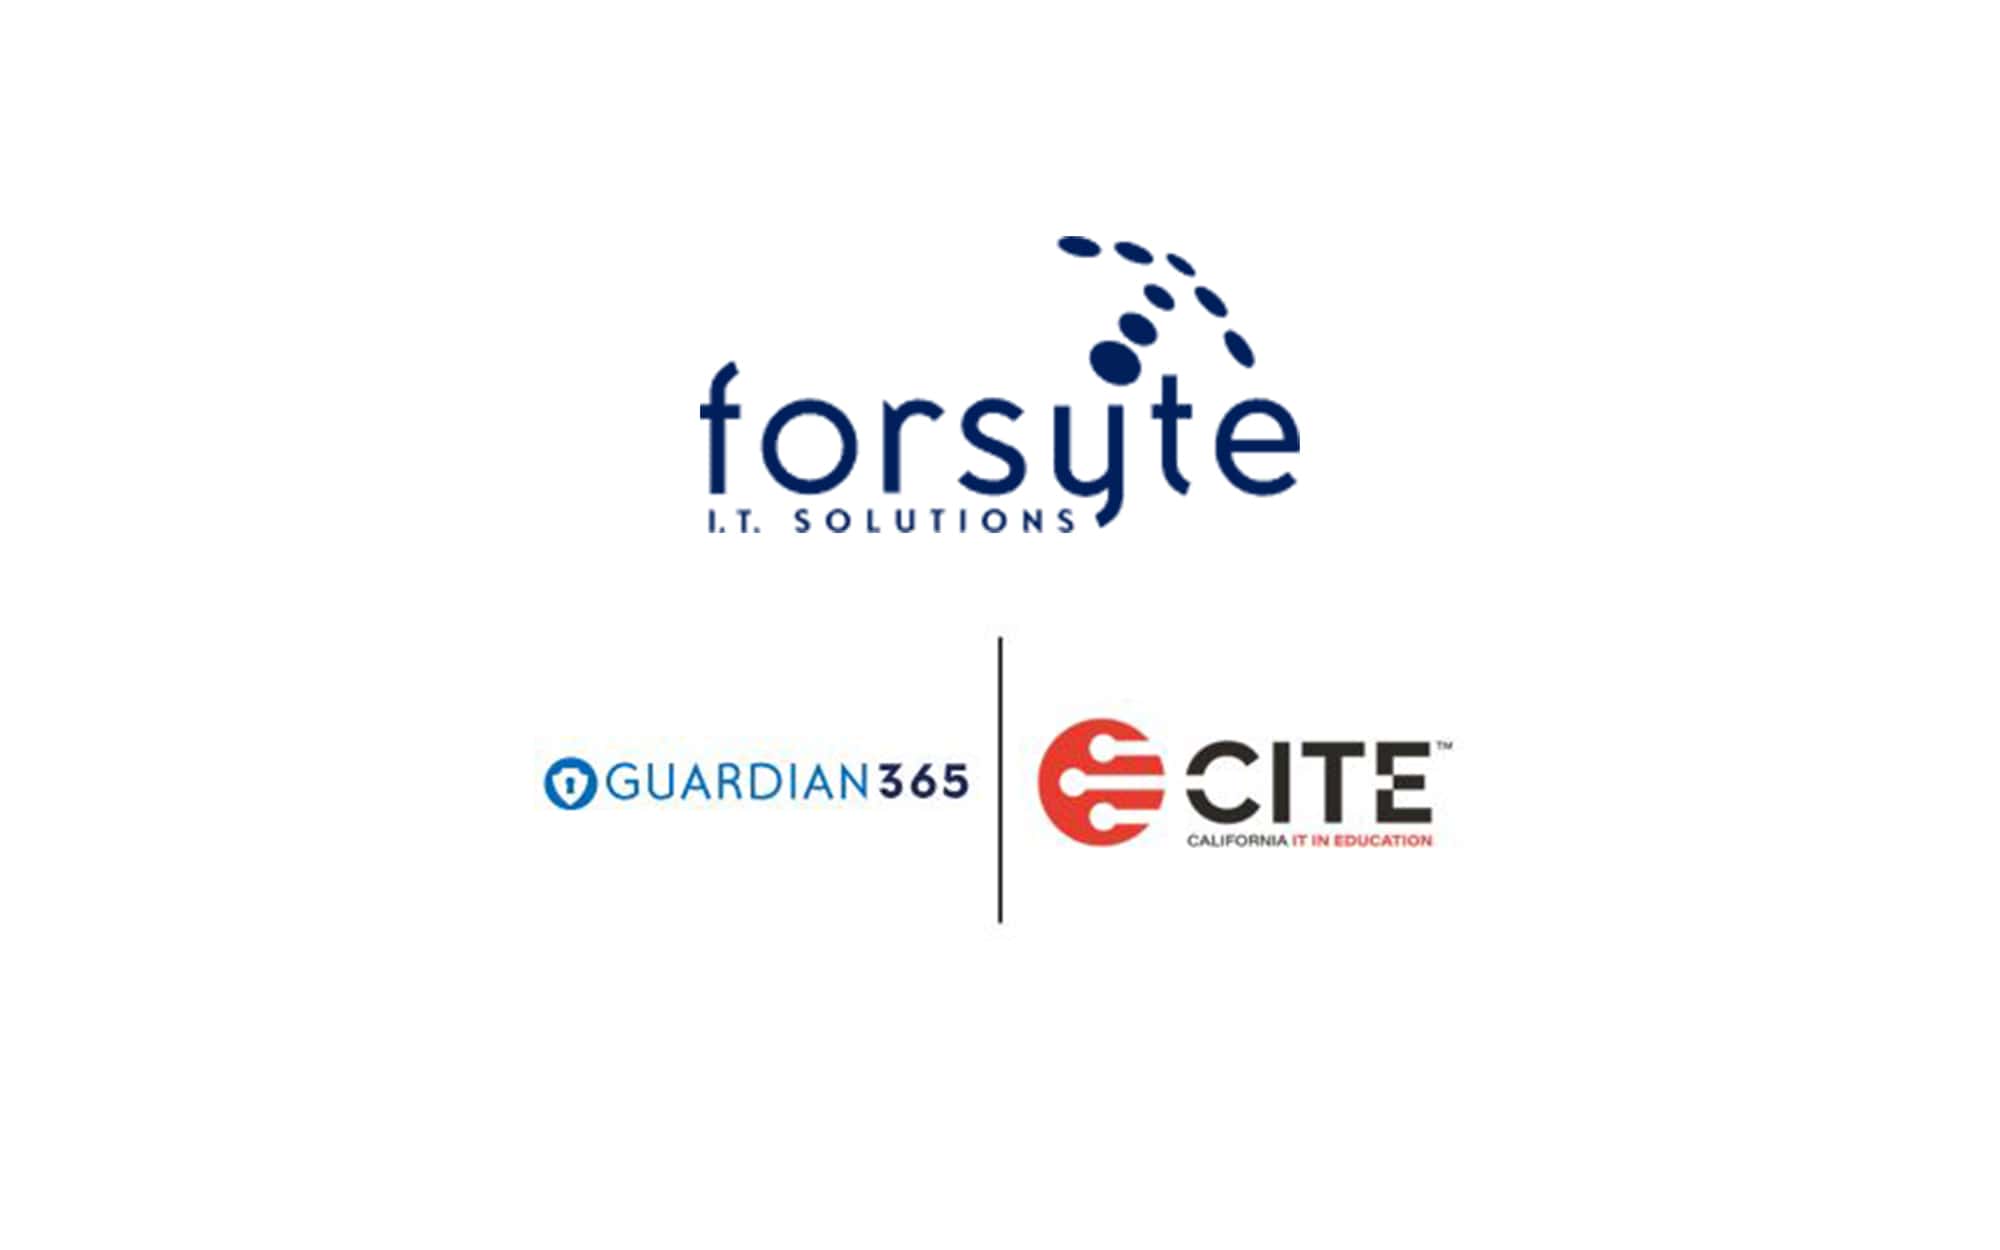 Forsyte I.T. Solutions and California IT in Education (CITE) Collaboration